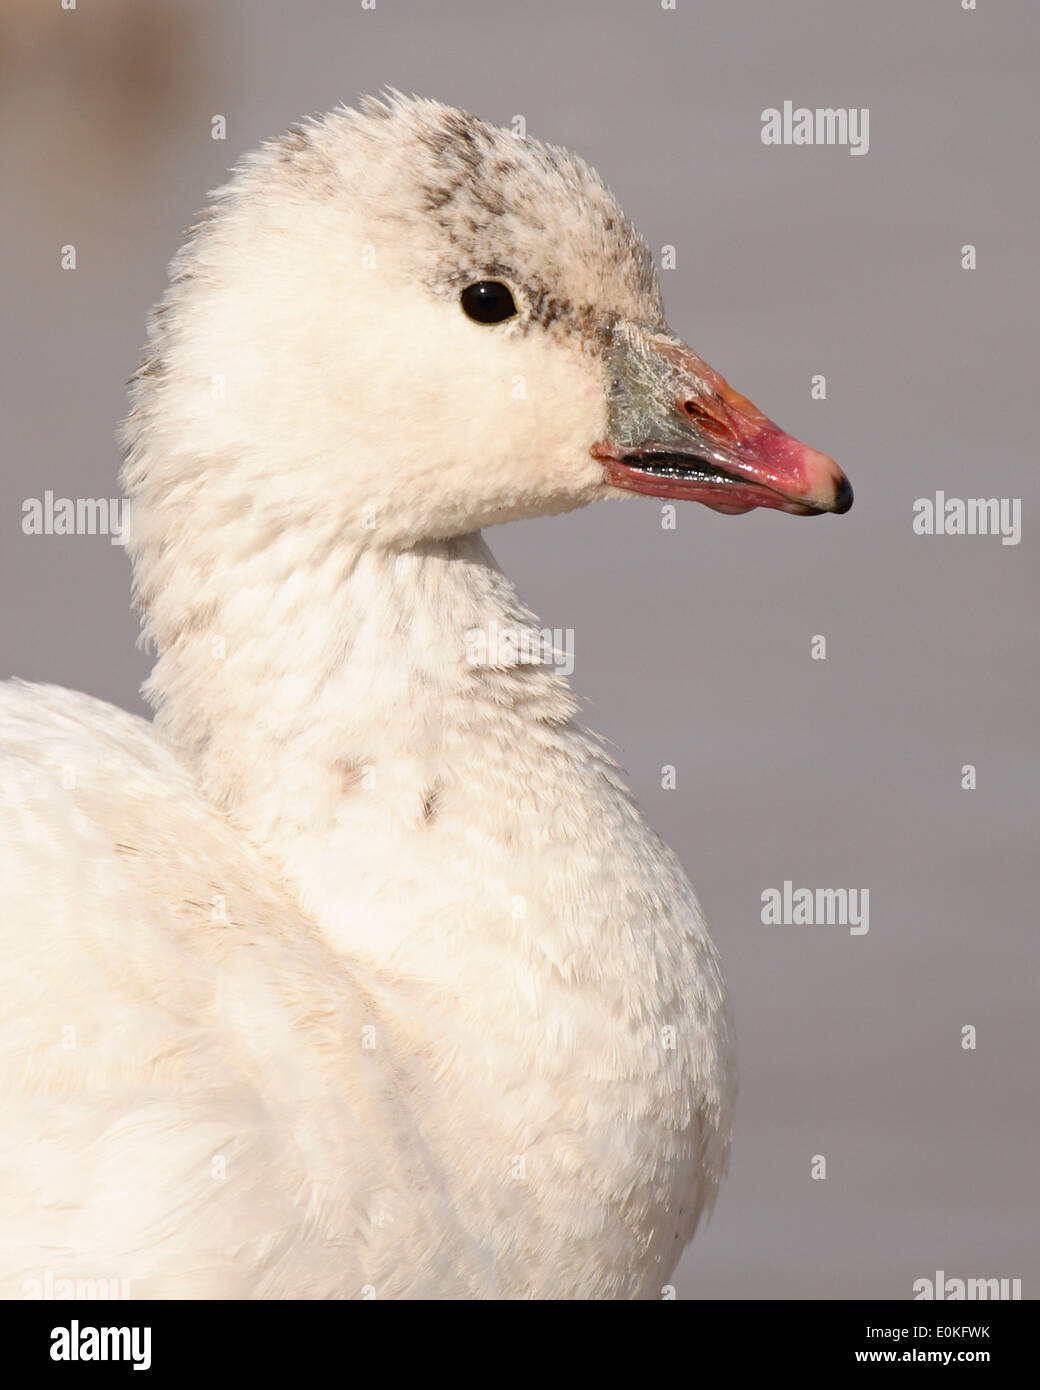 A portrait of a Ross's Goose with a colorful bill. Stock Photo